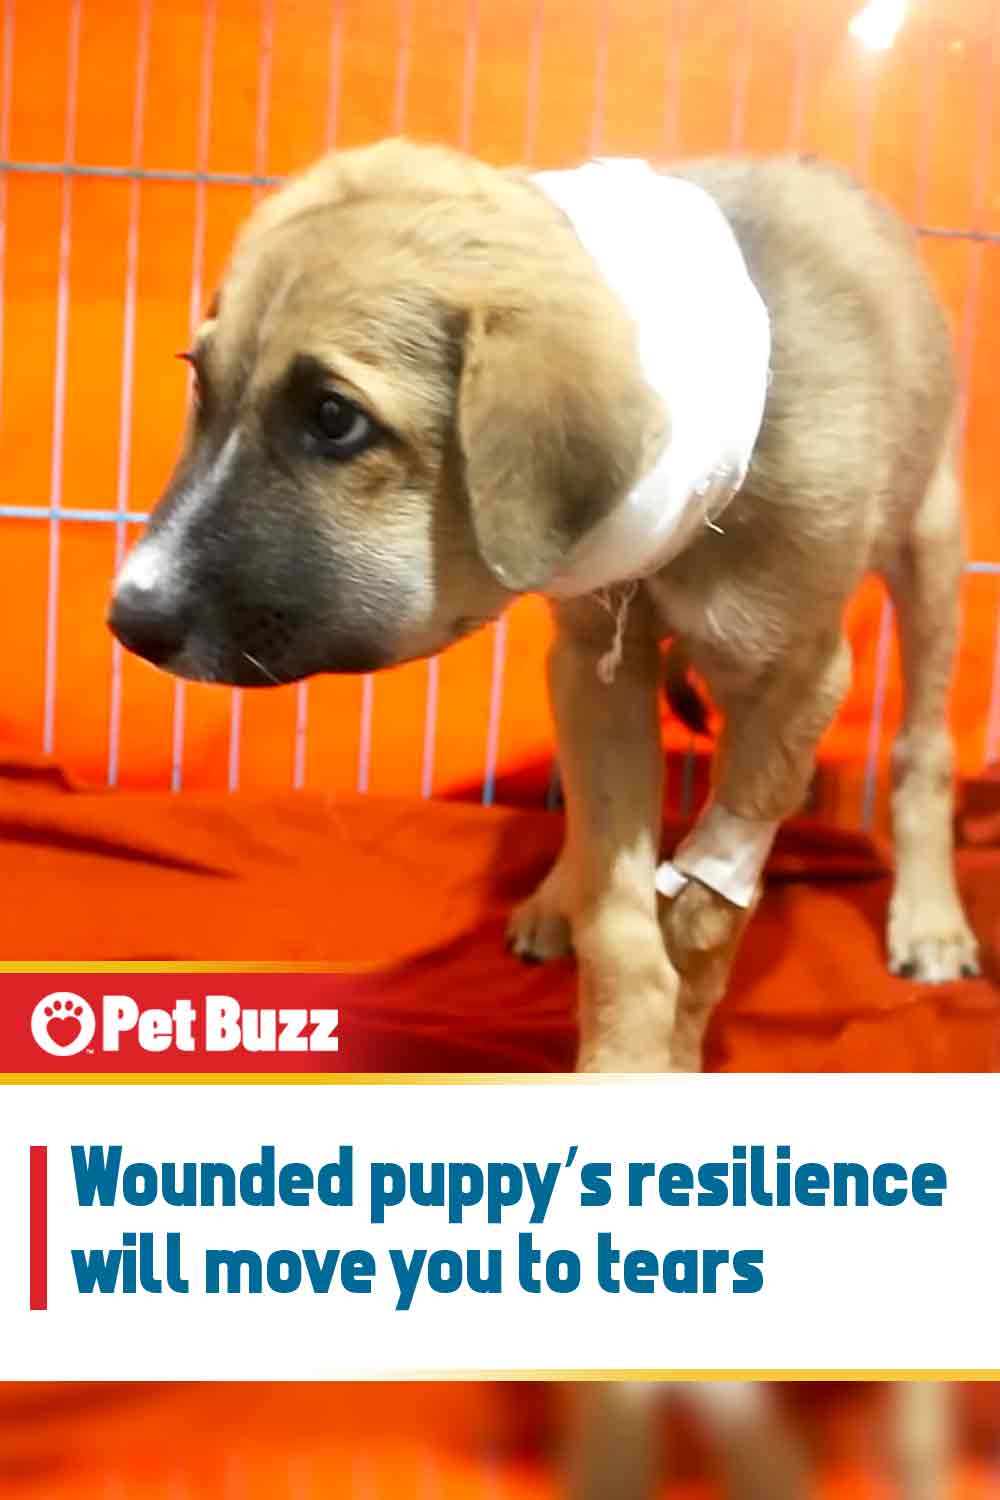 Wounded puppy’s resilience will move you to tears